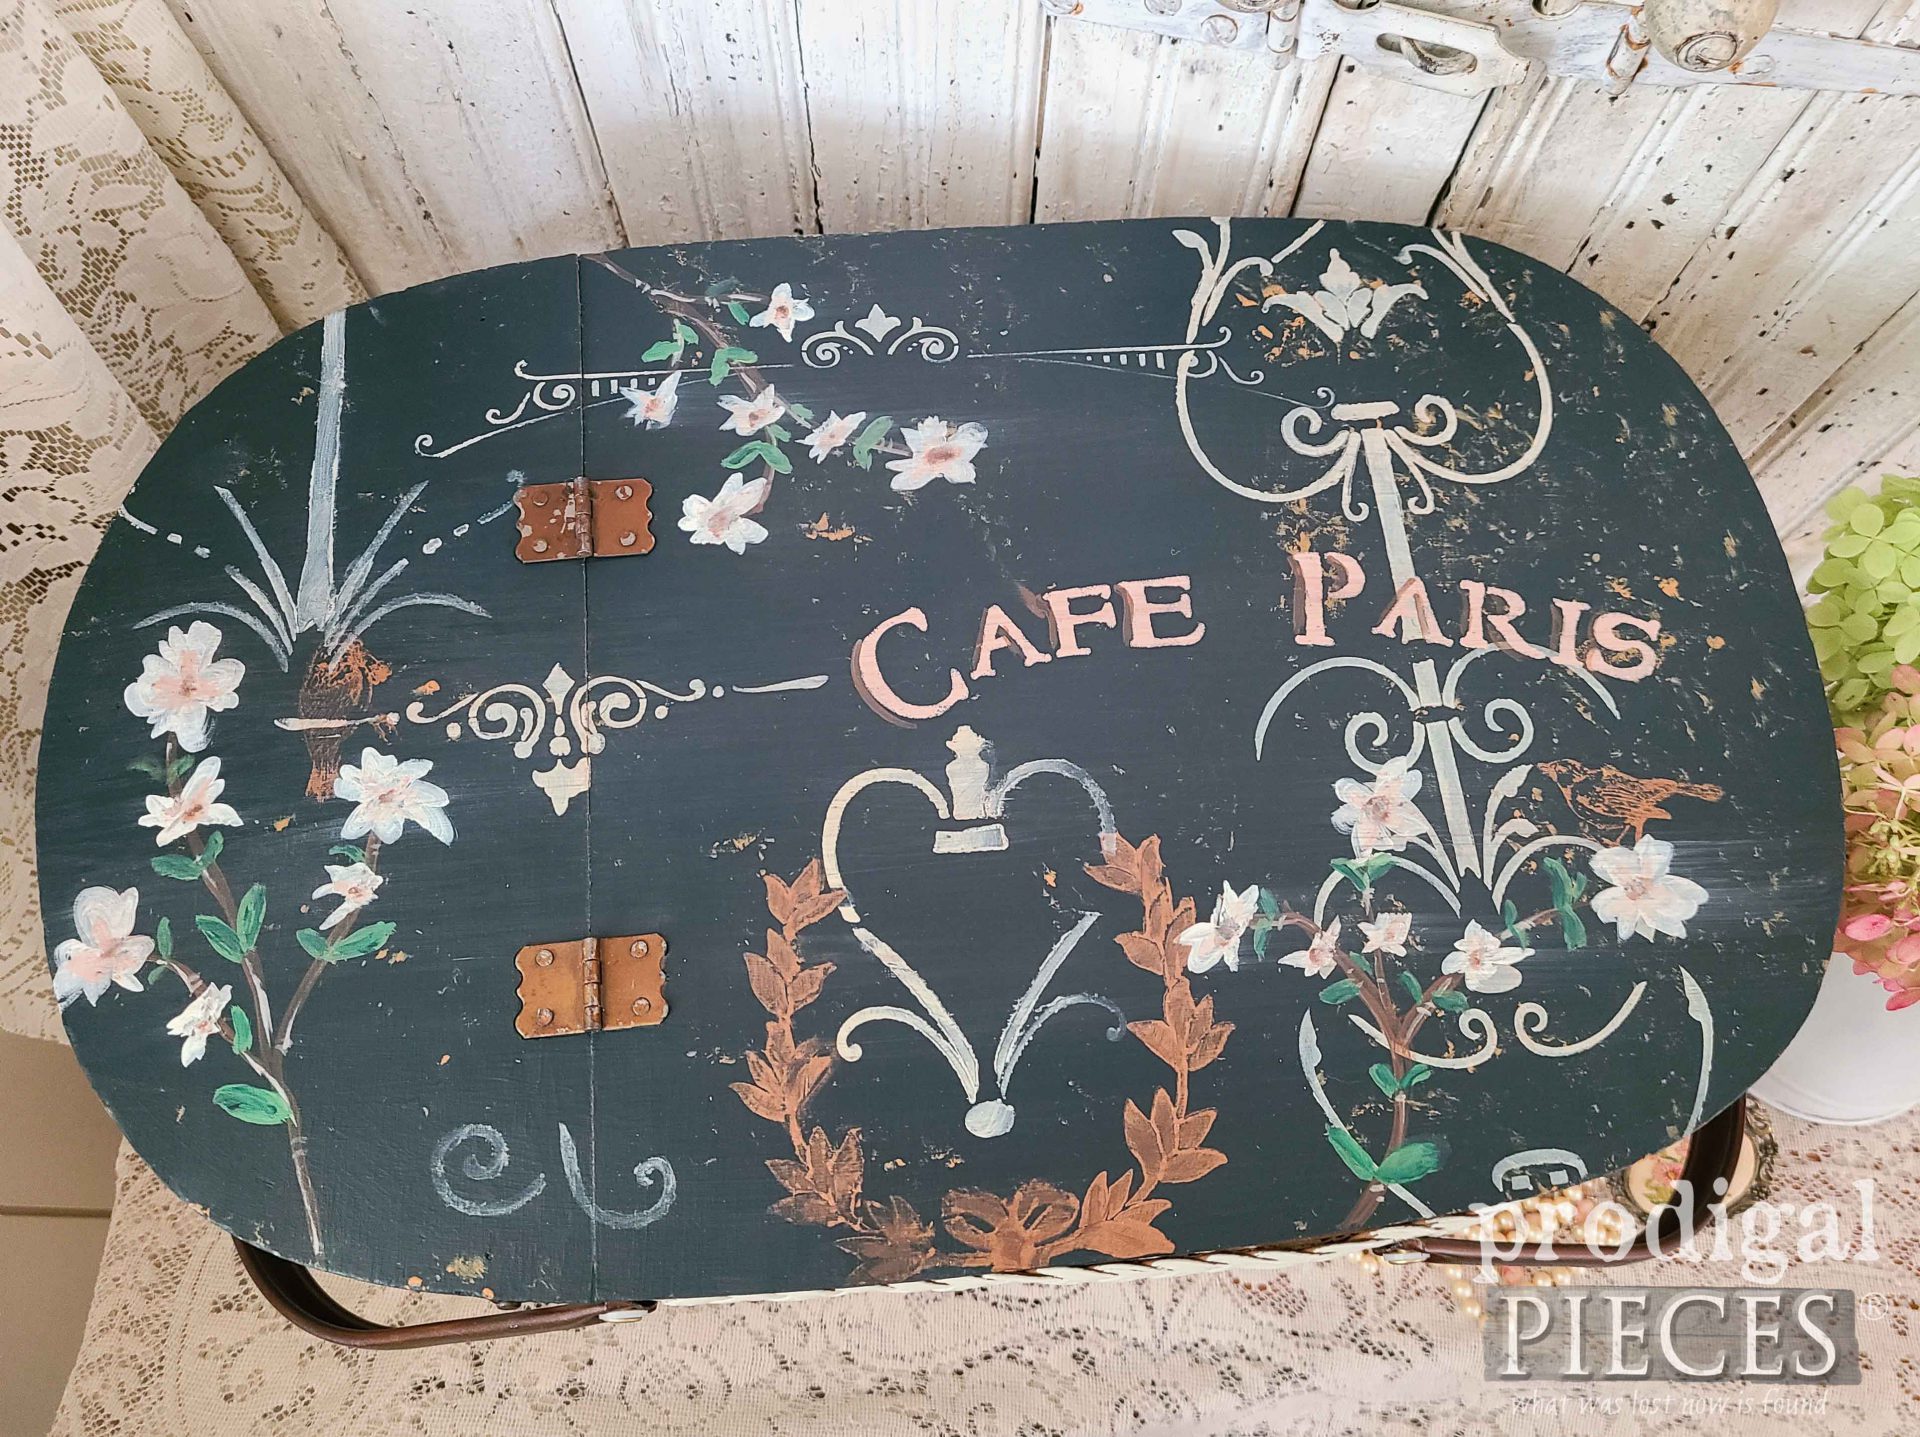 Vintage Picnic Basket Lid with Hand-Painted Design by Larissa of Prodigal Pieces | prodigalpieces.com #prodigalpieces #vintage #art